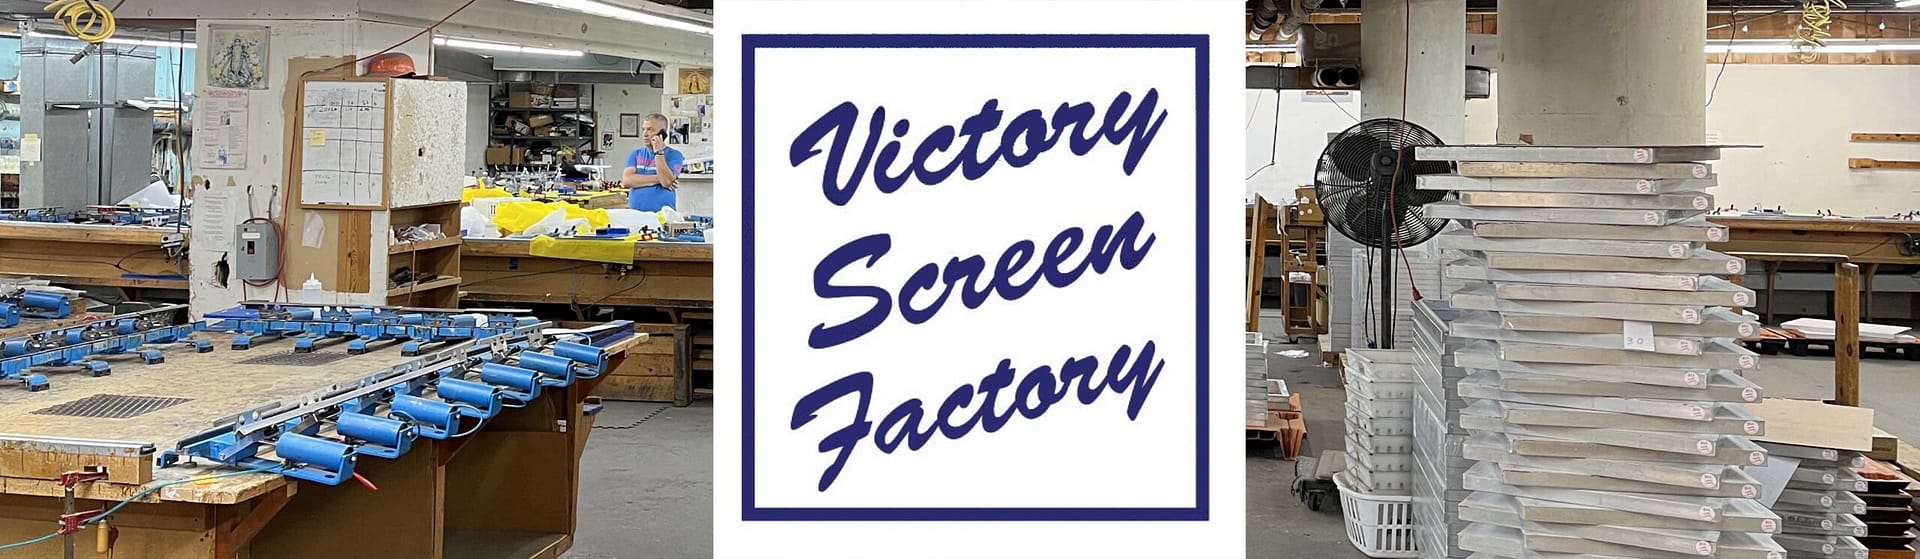 Small Aluminum Screens for Exceptional Results – Victory Screen Factory